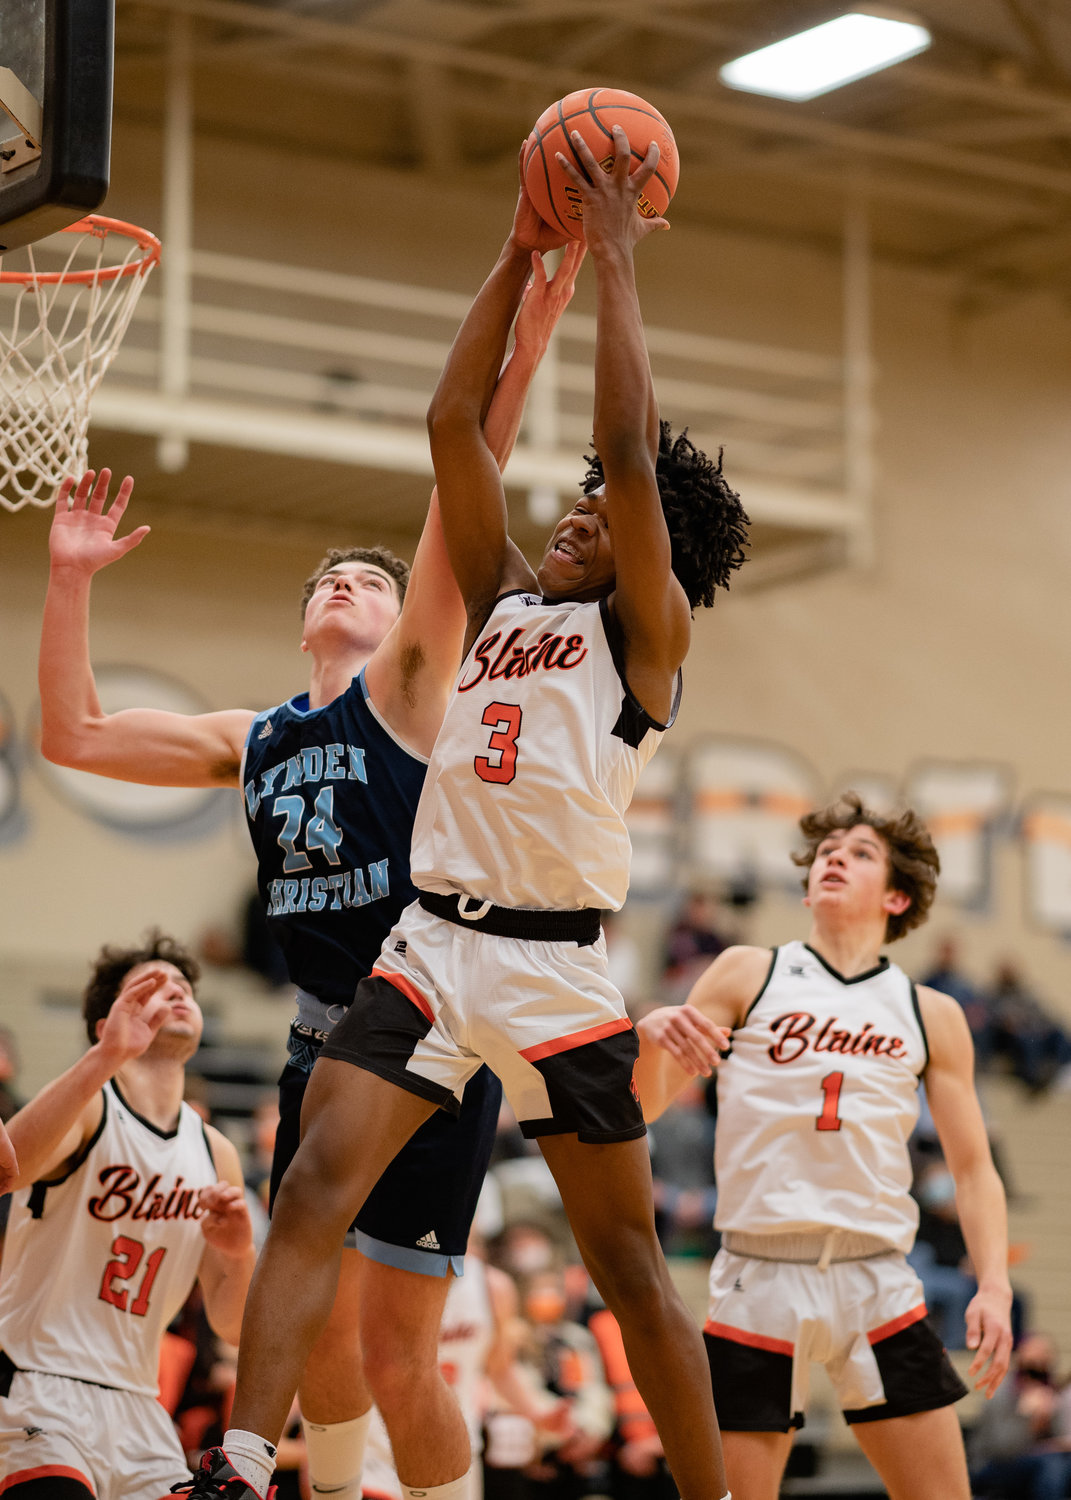 Matthew Russ up for a layup in the Borderites home game against Lynden Christian last year. The Borderites and Lyncs both traveled to the 1A state championship tournament last season. The Lyncs ended up being crowned state champions.